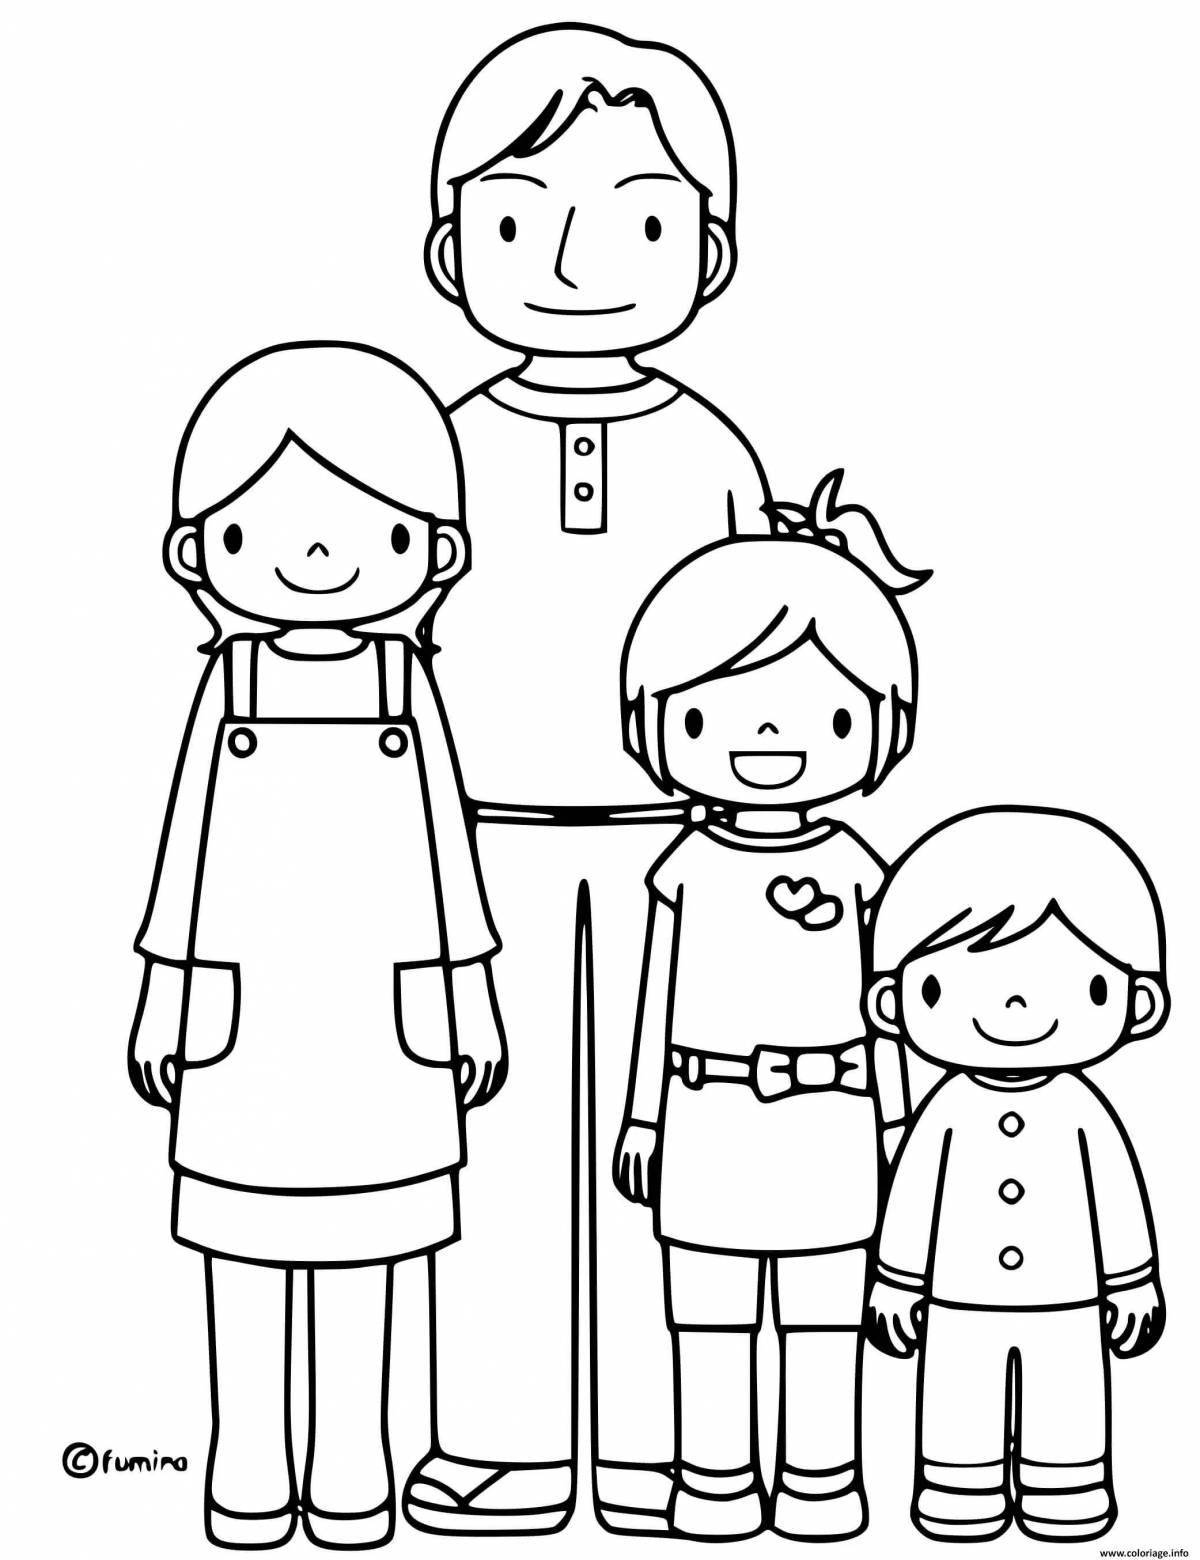 Charming coloring my family of 4